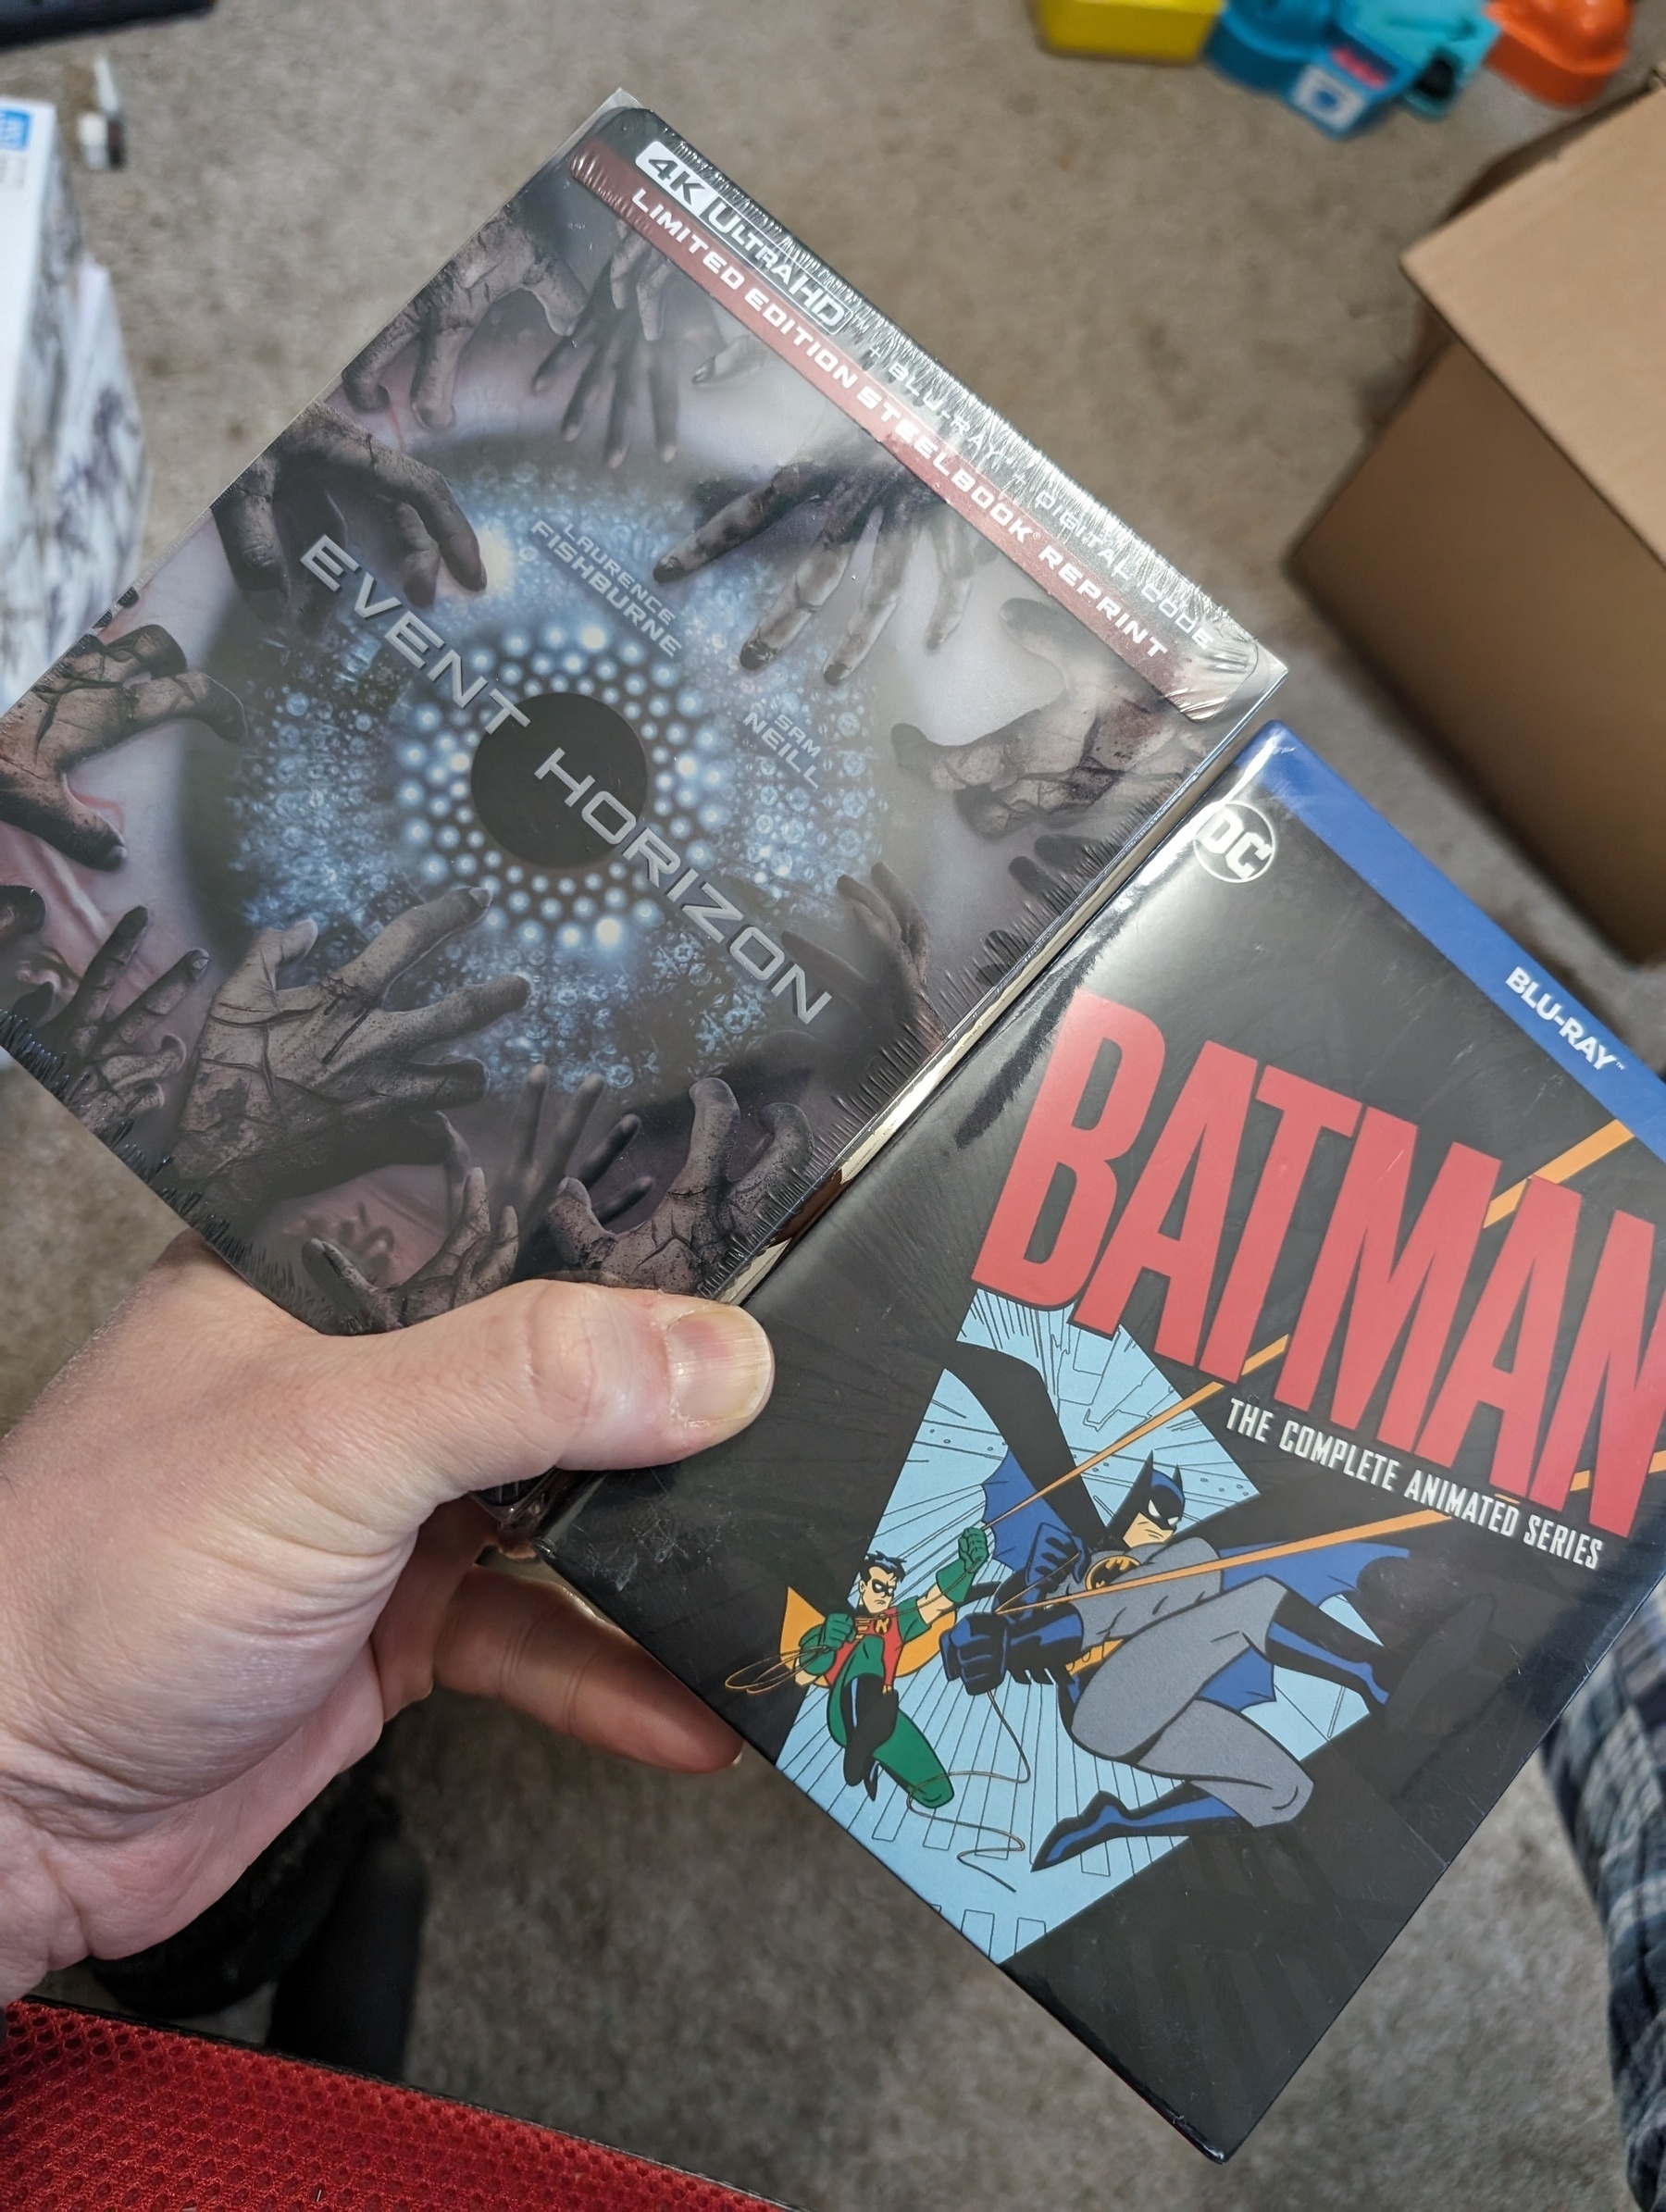 Photo of "Event Horizon Limited Edition Ultra 4K Steelbook" and "Batman - The Animated Series Blu-ray"